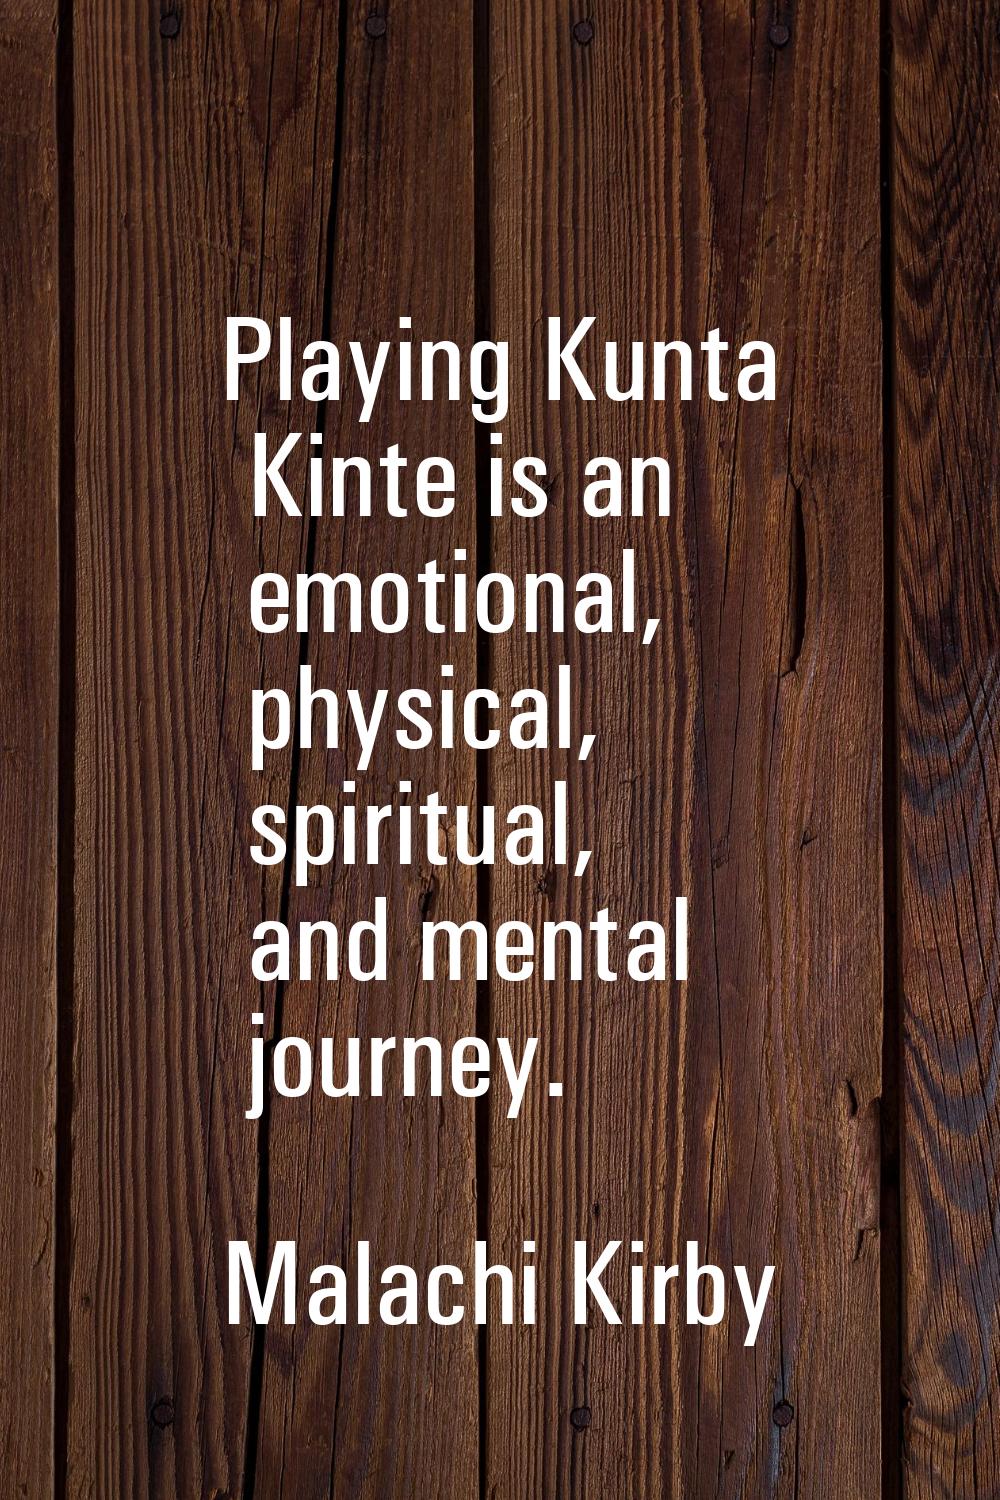 Playing Kunta Kinte is an emotional, physical, spiritual, and mental journey.